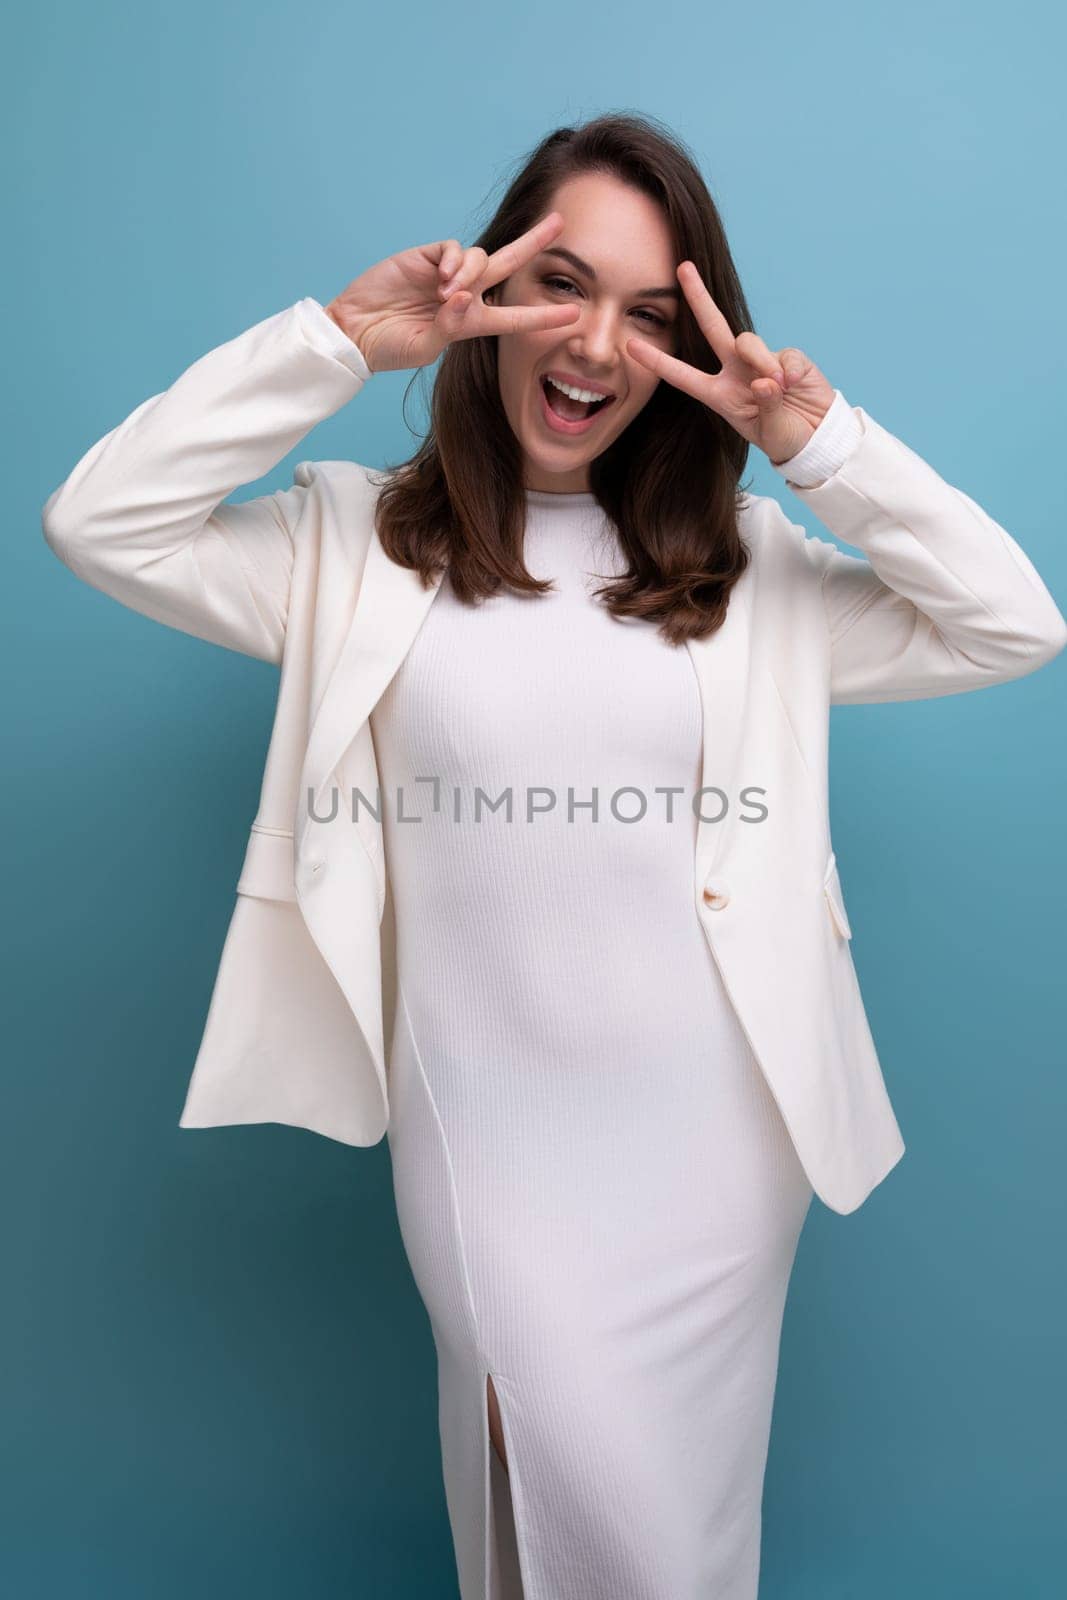 european brunette woman in white dress makes a grimace on studio background.